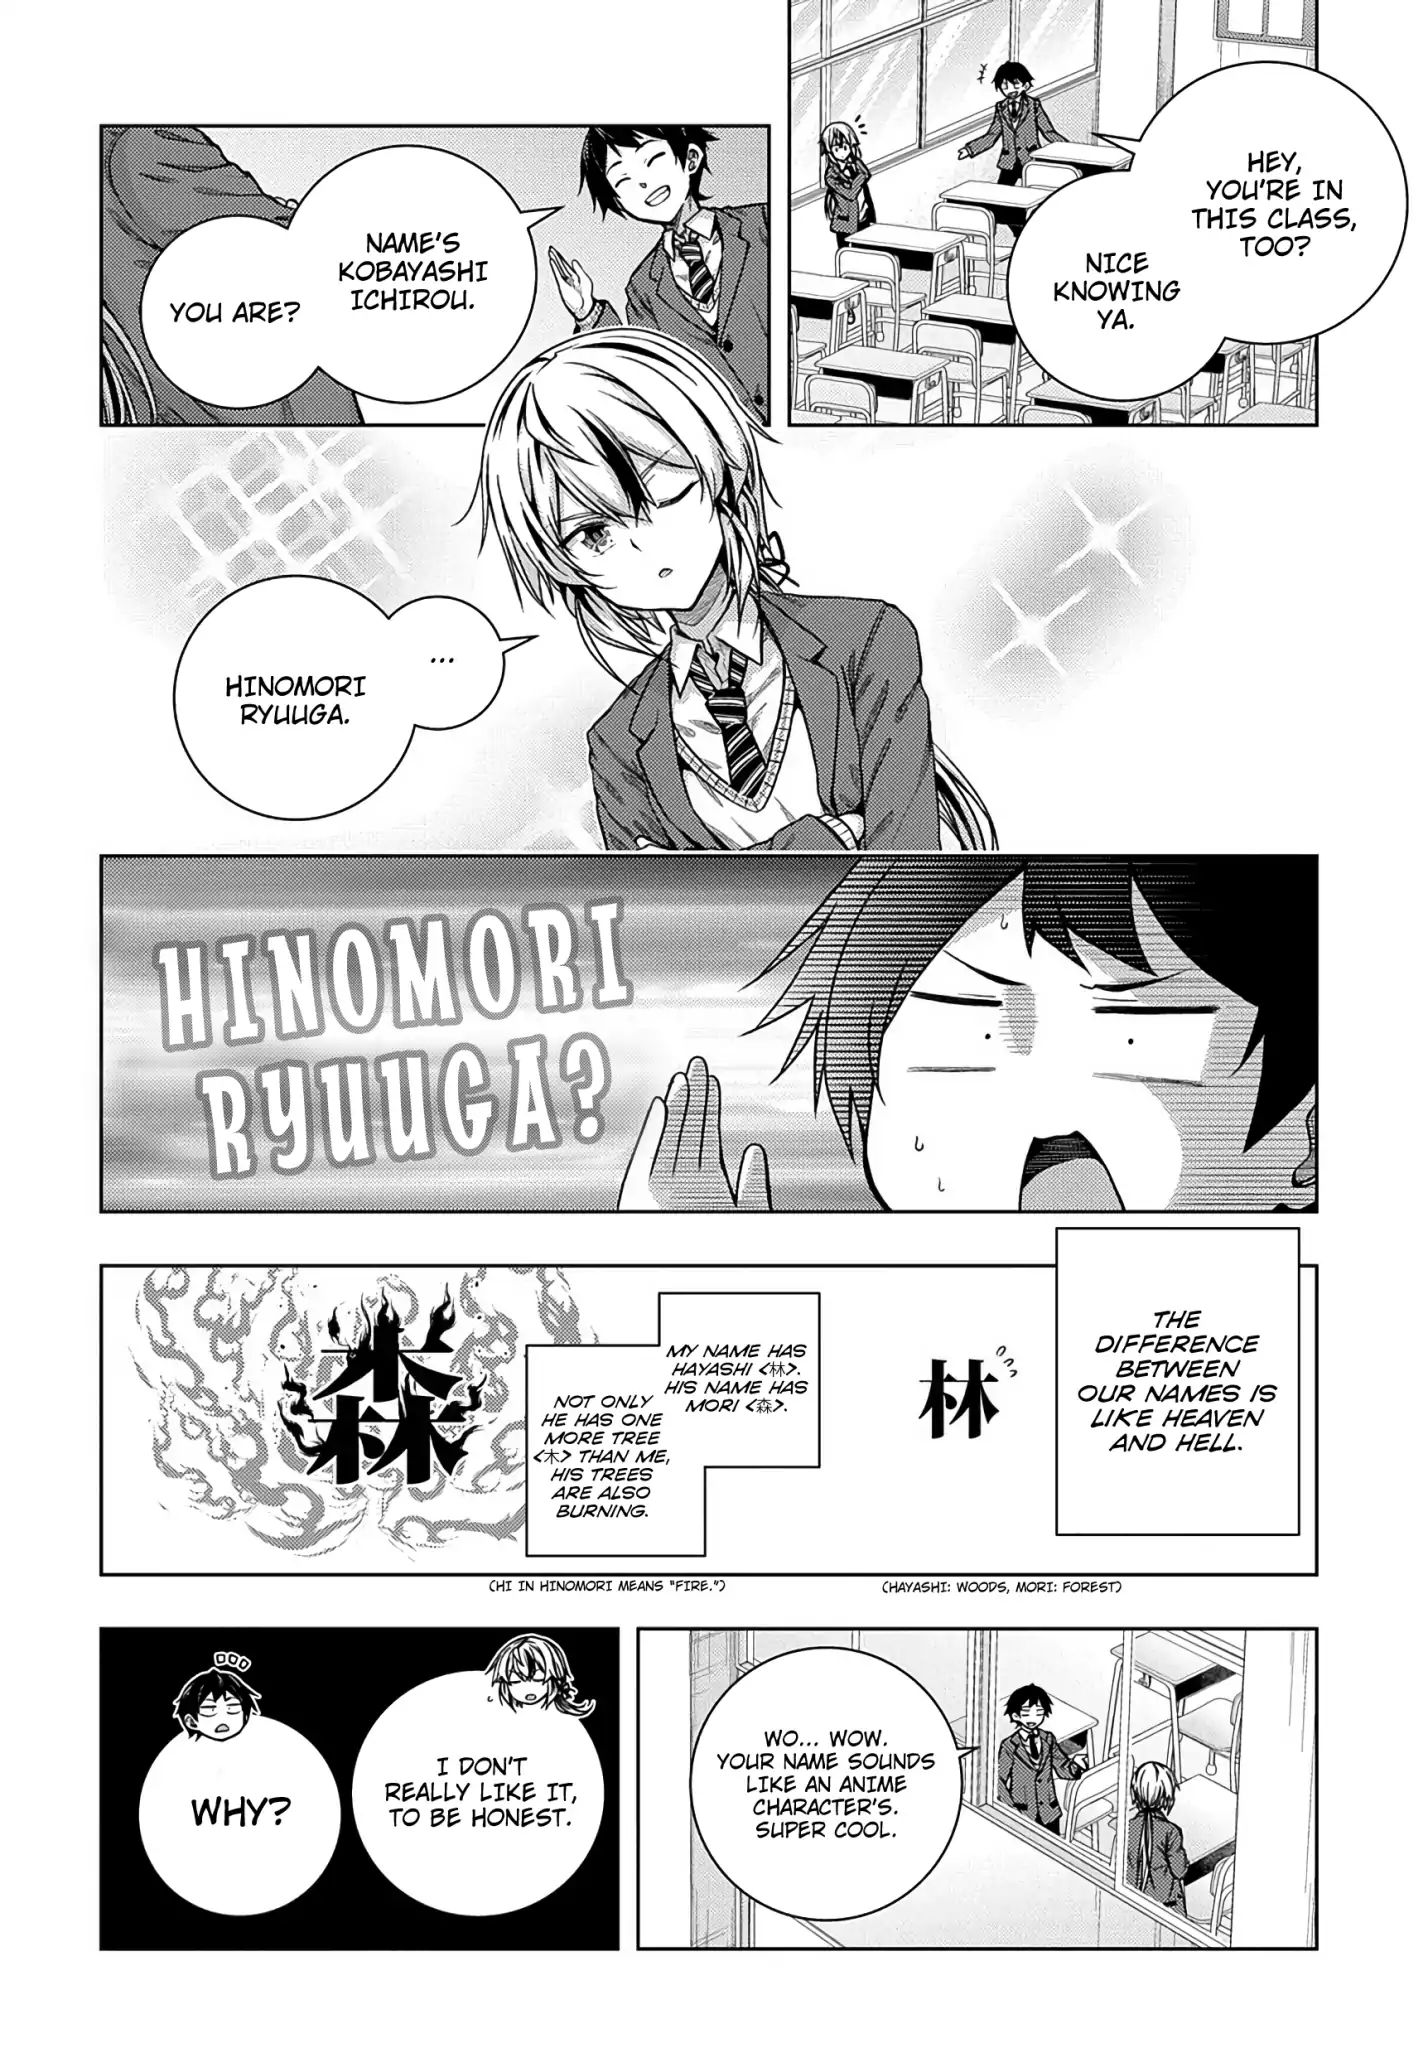 Read Is it Tough Being a Friend? Manga English [New ...